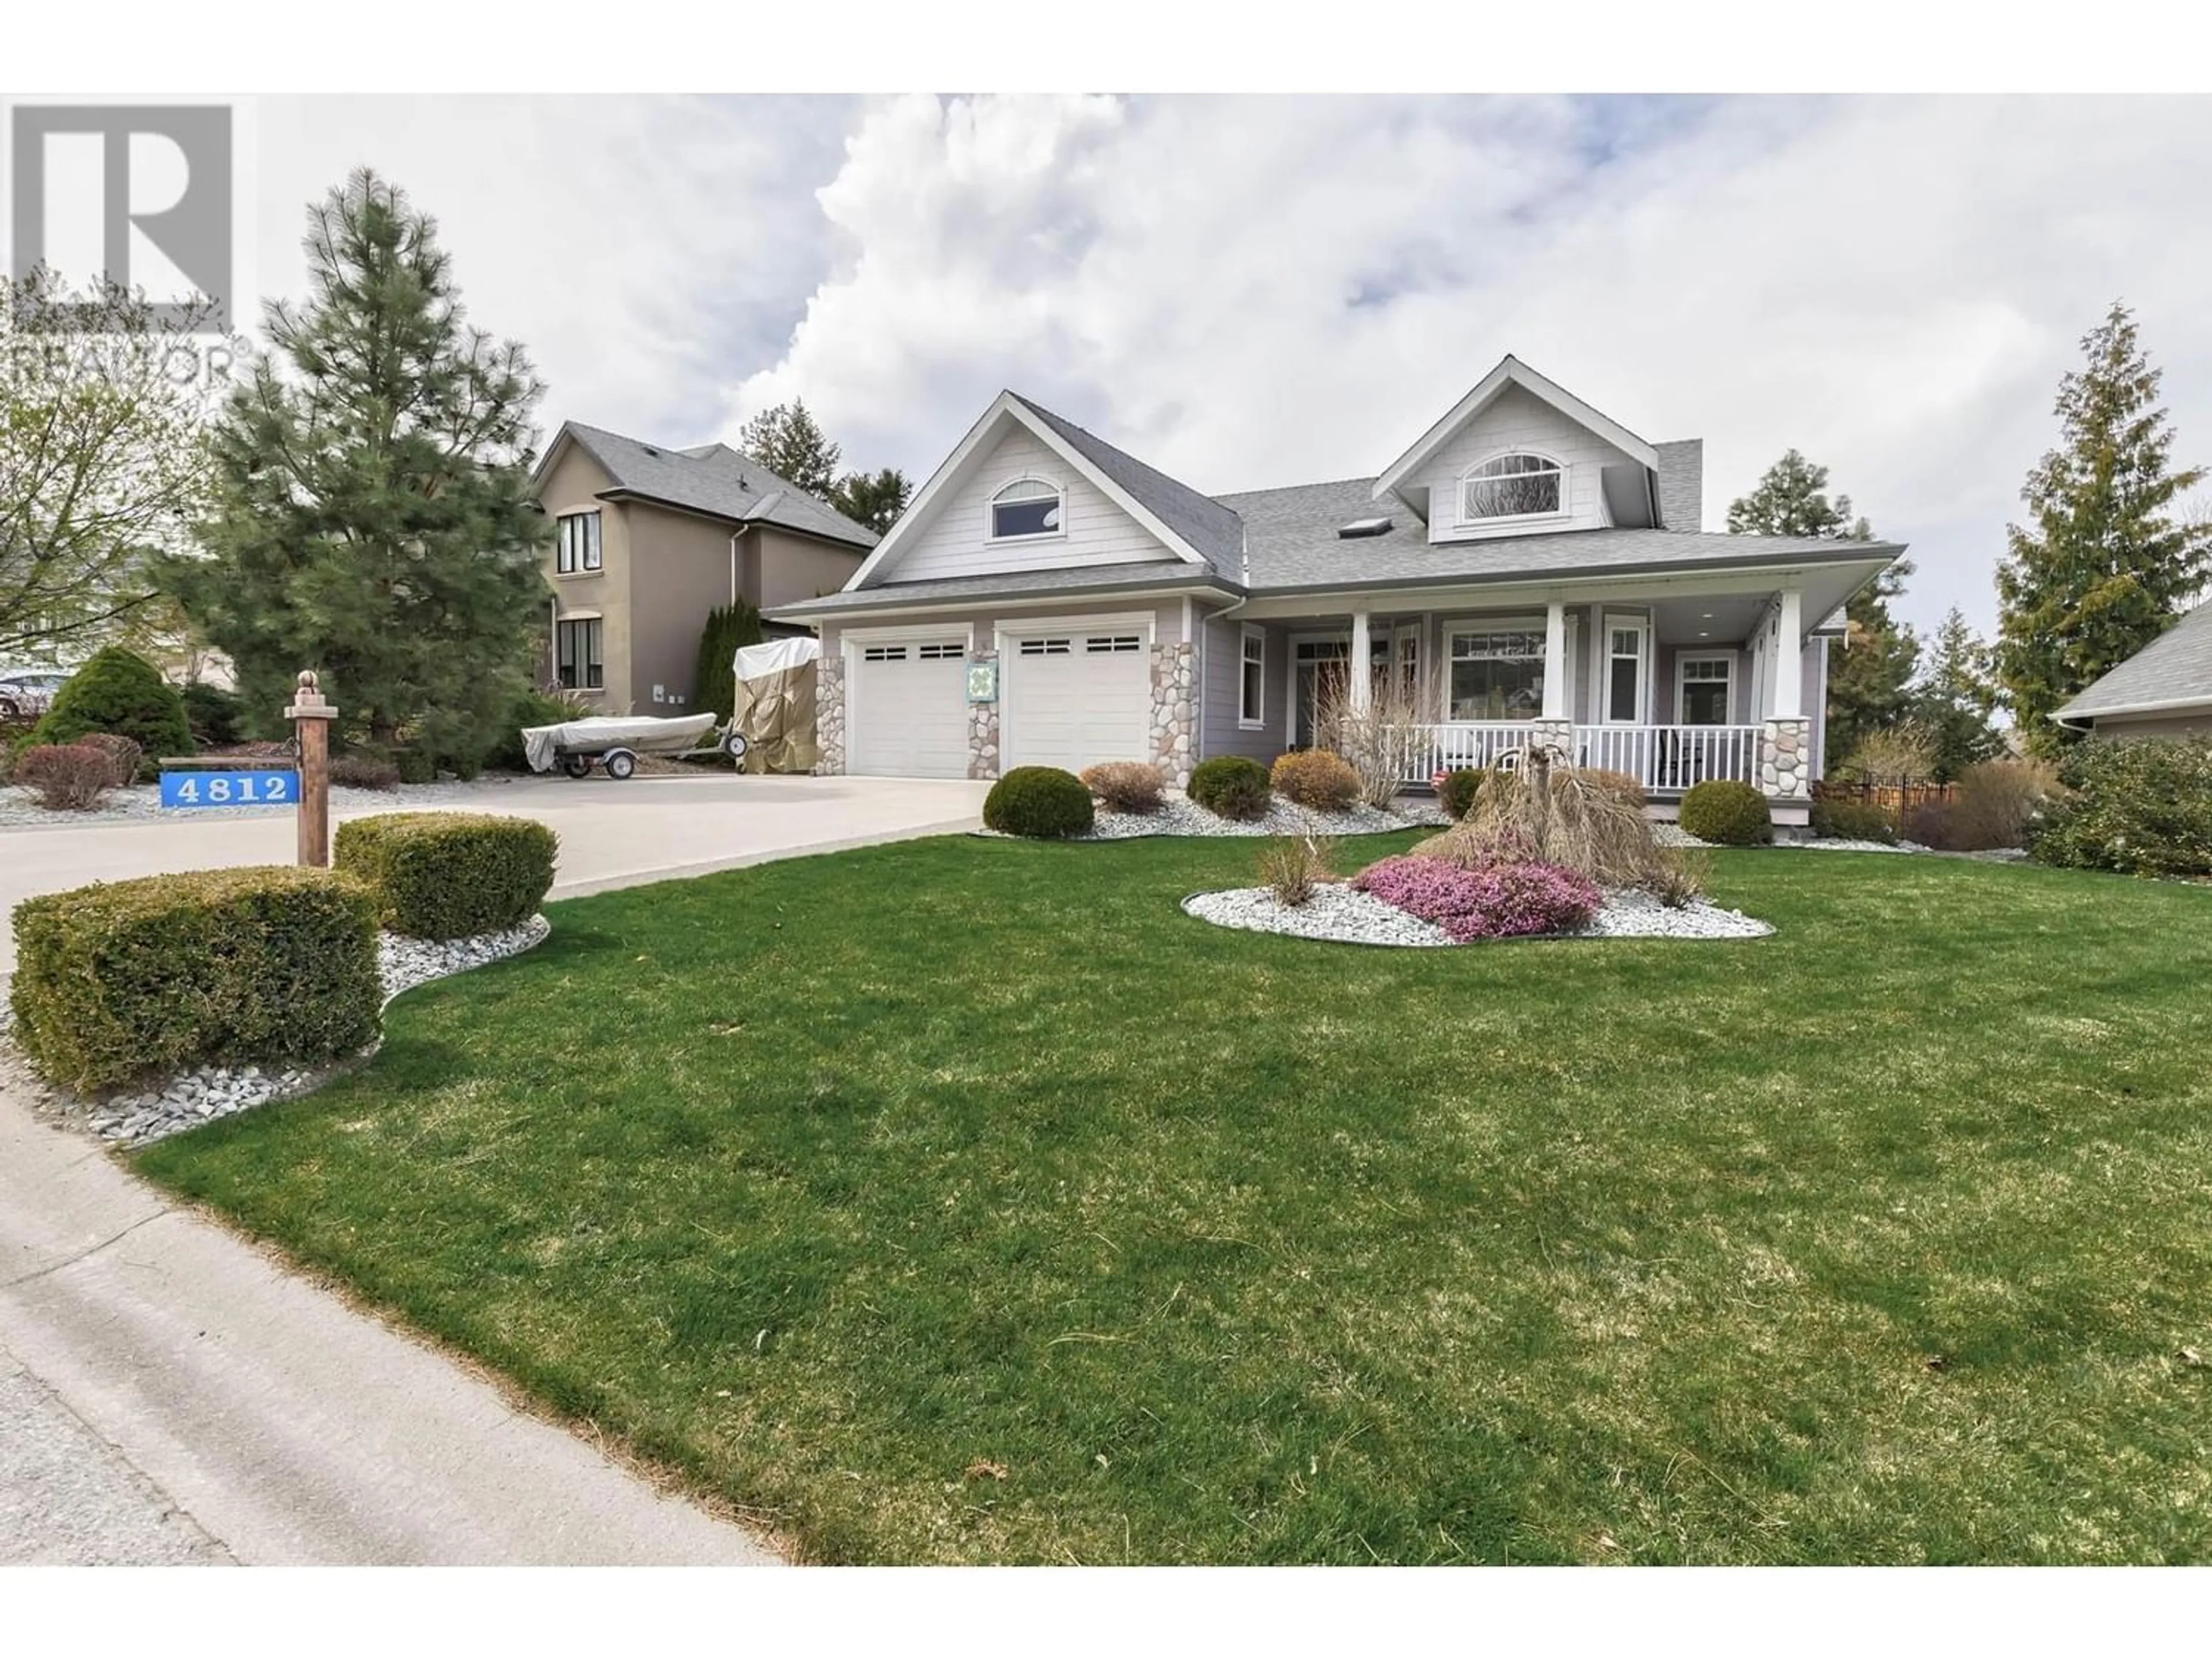 Frontside or backside of a home for 4812 Parkridge Drive, Kelowna British Columbia V1W3A1